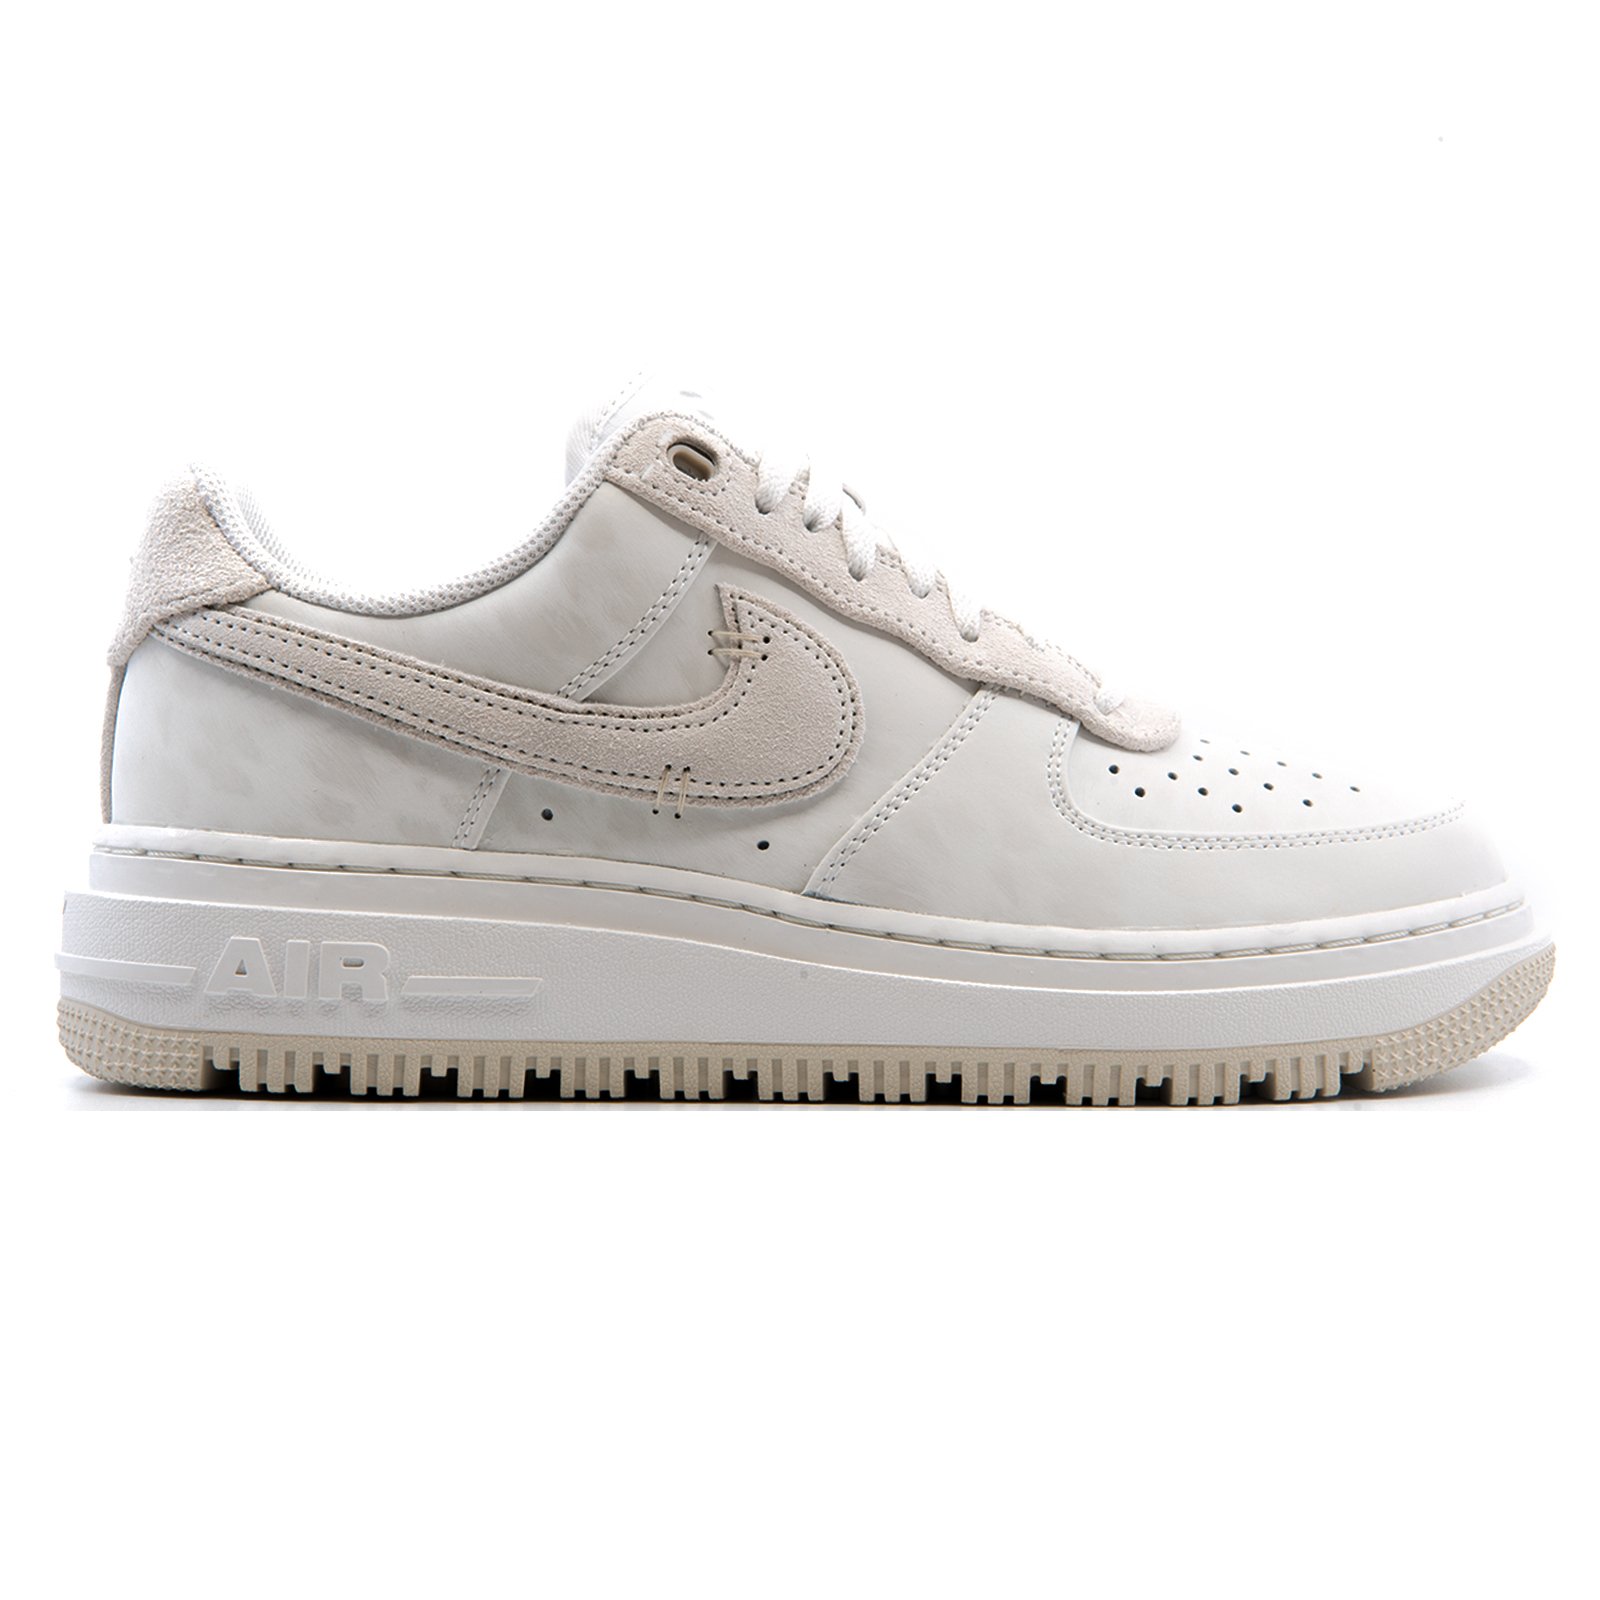 African spring perturbation Nike Air Force 1 Luxe Ho21 DD9605-100-40 - Sportselect.ro